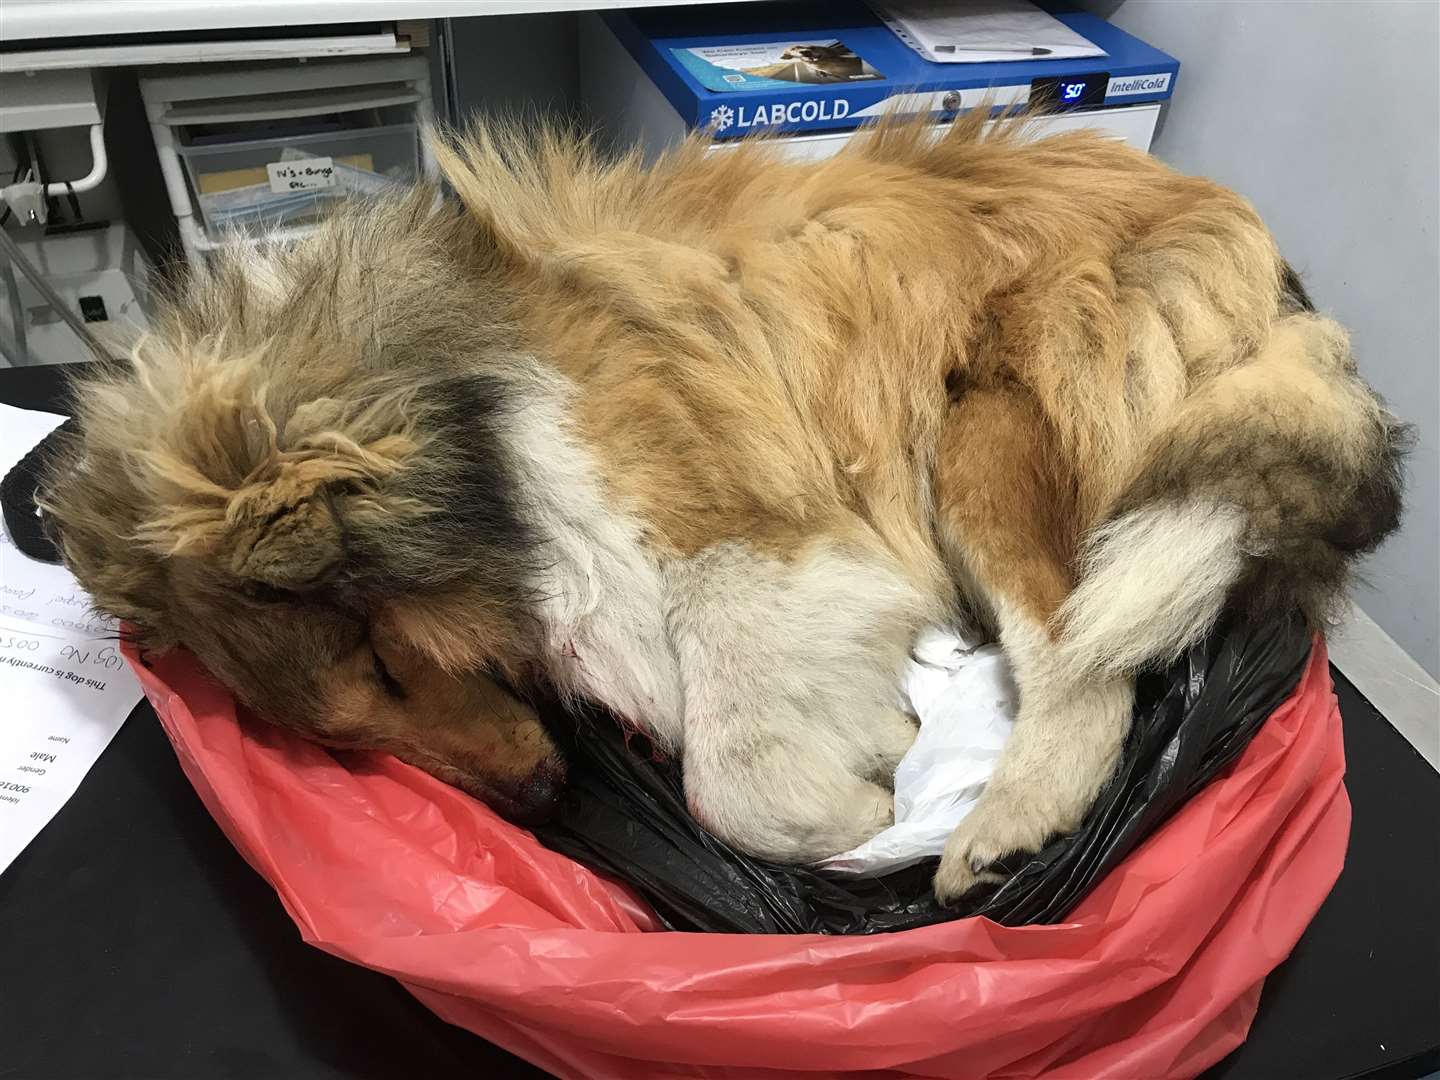 RSPCA investigators have now launched an appeal for anyone to help find out what happened to the young puppy. Picture: RSPCA